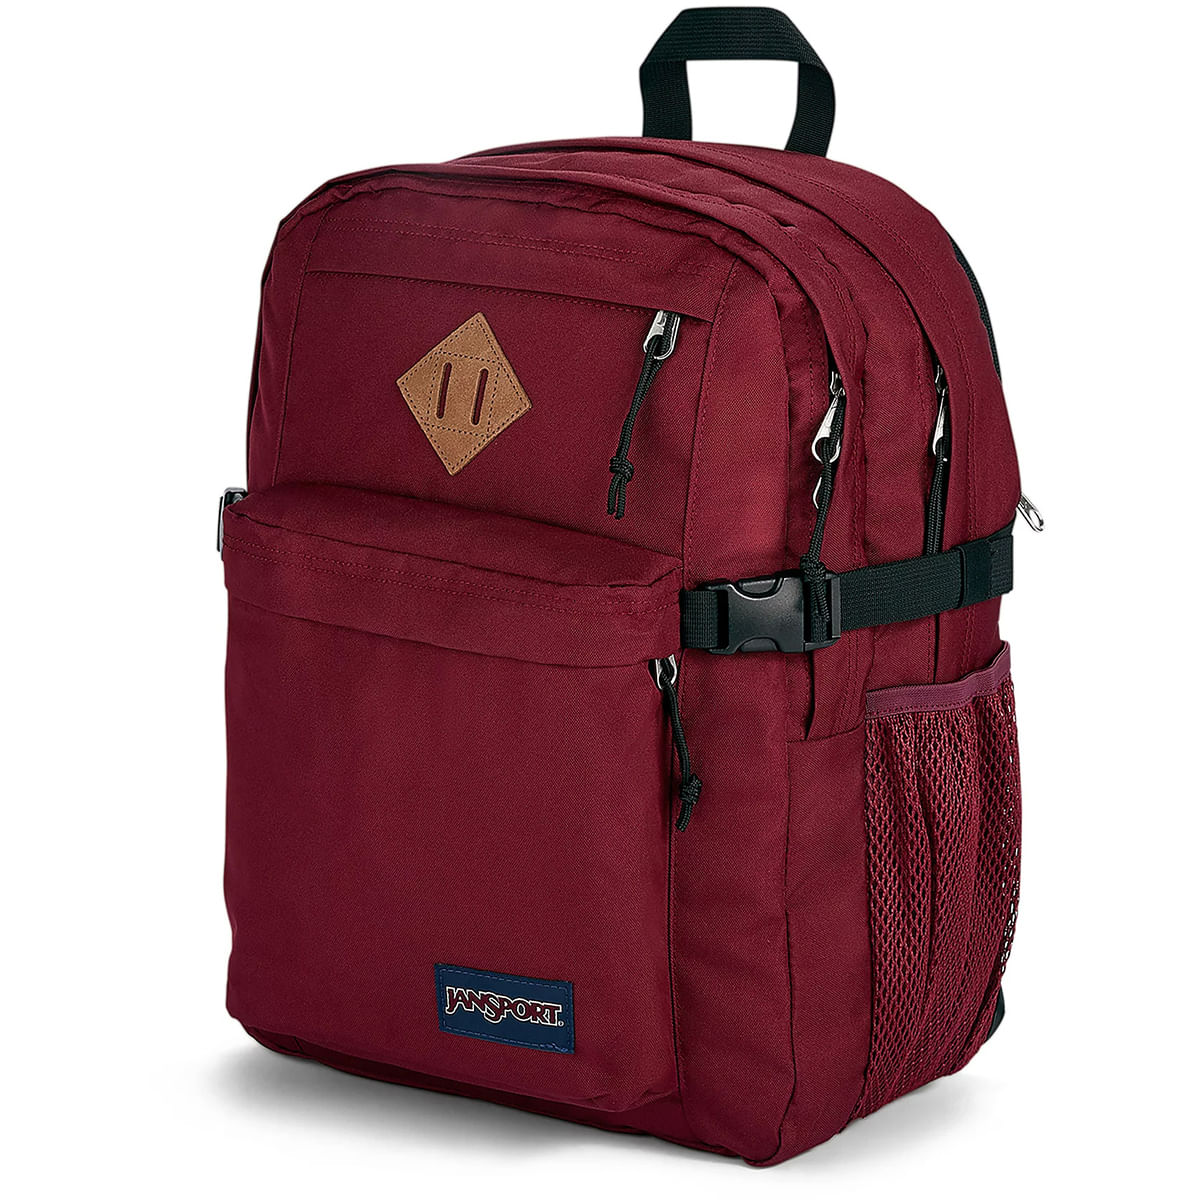 JanSport MAIN CAMPUS RUSSET RED - Paragon Sports: NYC's Best Specialty  Sports Store